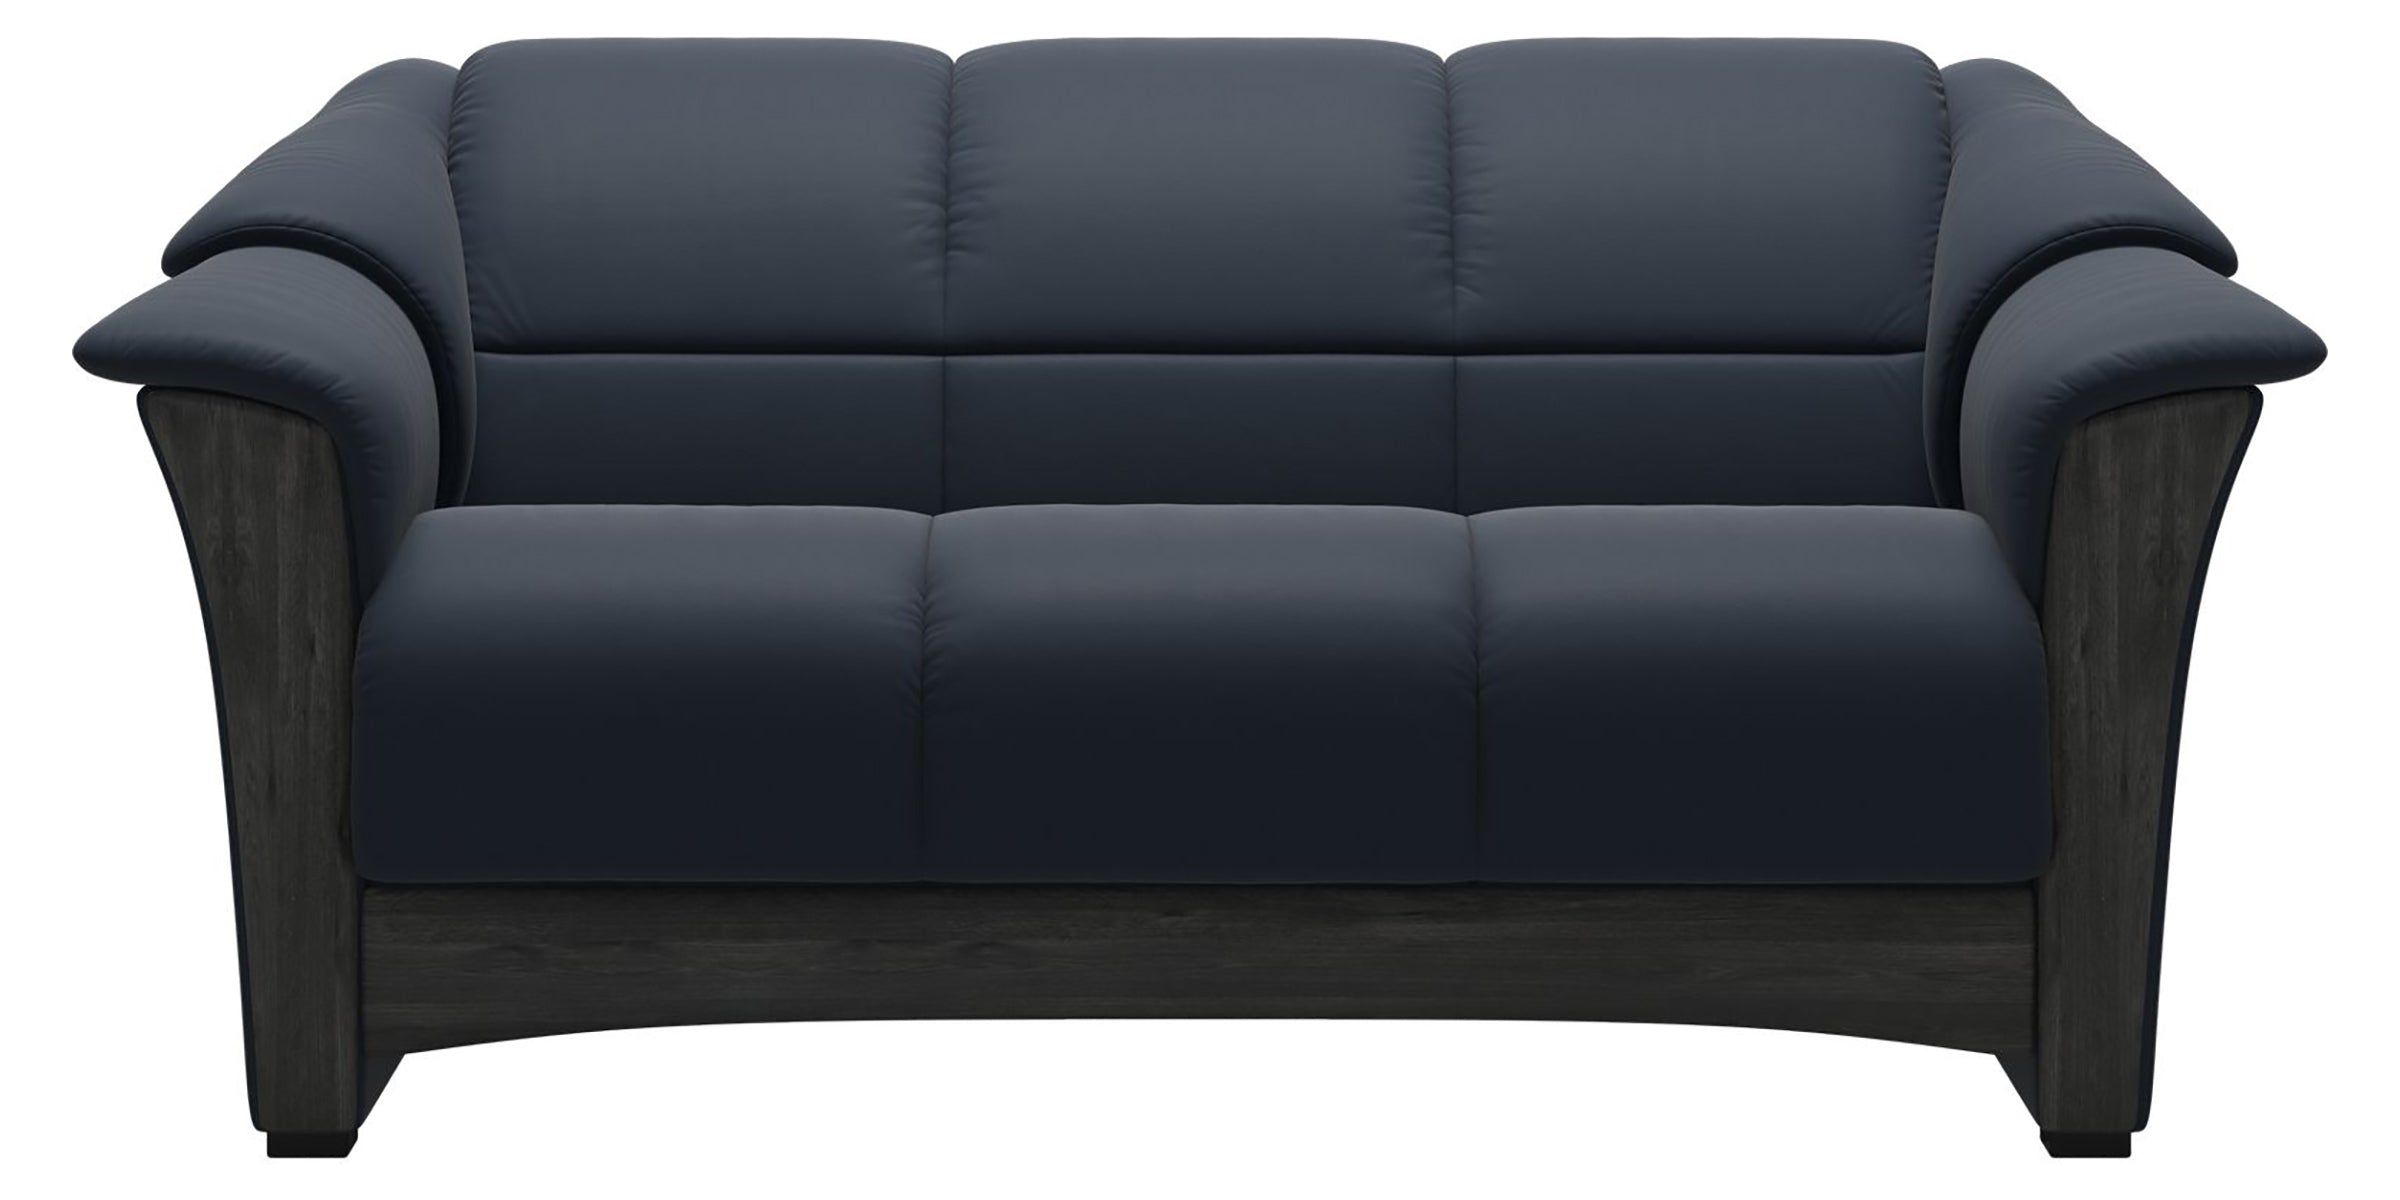 Paloma Leather Oxford Blue and Grey Base | Stressless Oslo Loveseat | Valley Ridge Furniture